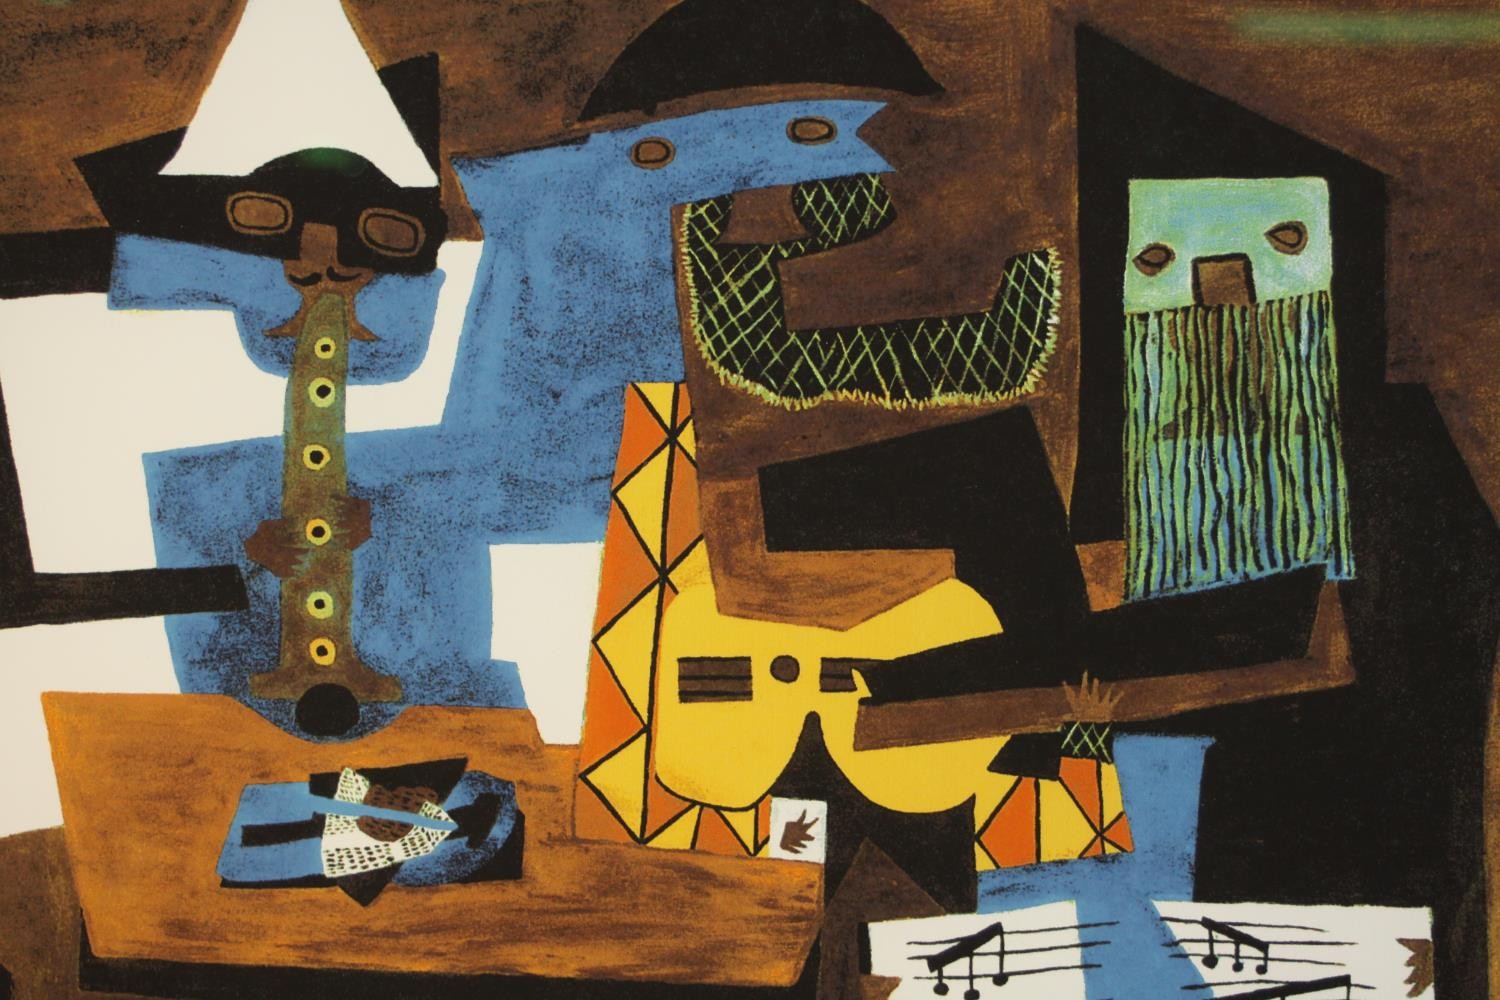 After Pablo Picasso (1881-1973), Three Musicians, a coloured limited Collection Domaine edition